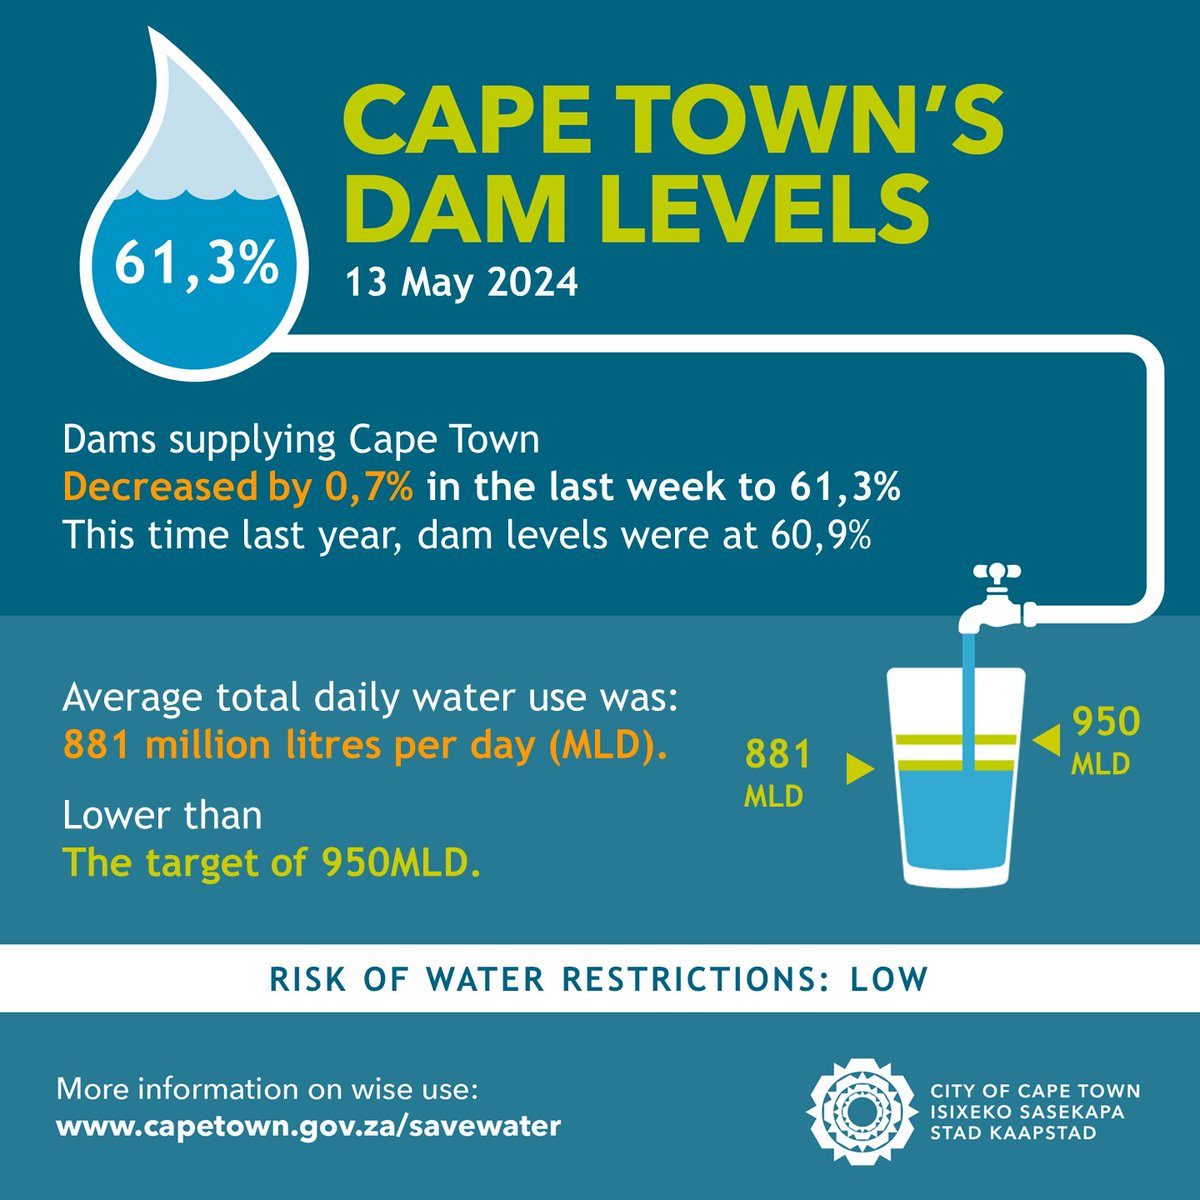 Cape Town, average water use over the past week has been 881 million litres per day (MLD), lower than our current target. Let’s all work together to collectively use less than 950 MLD. capetown.gov.za/savewater #DamLevelsCT